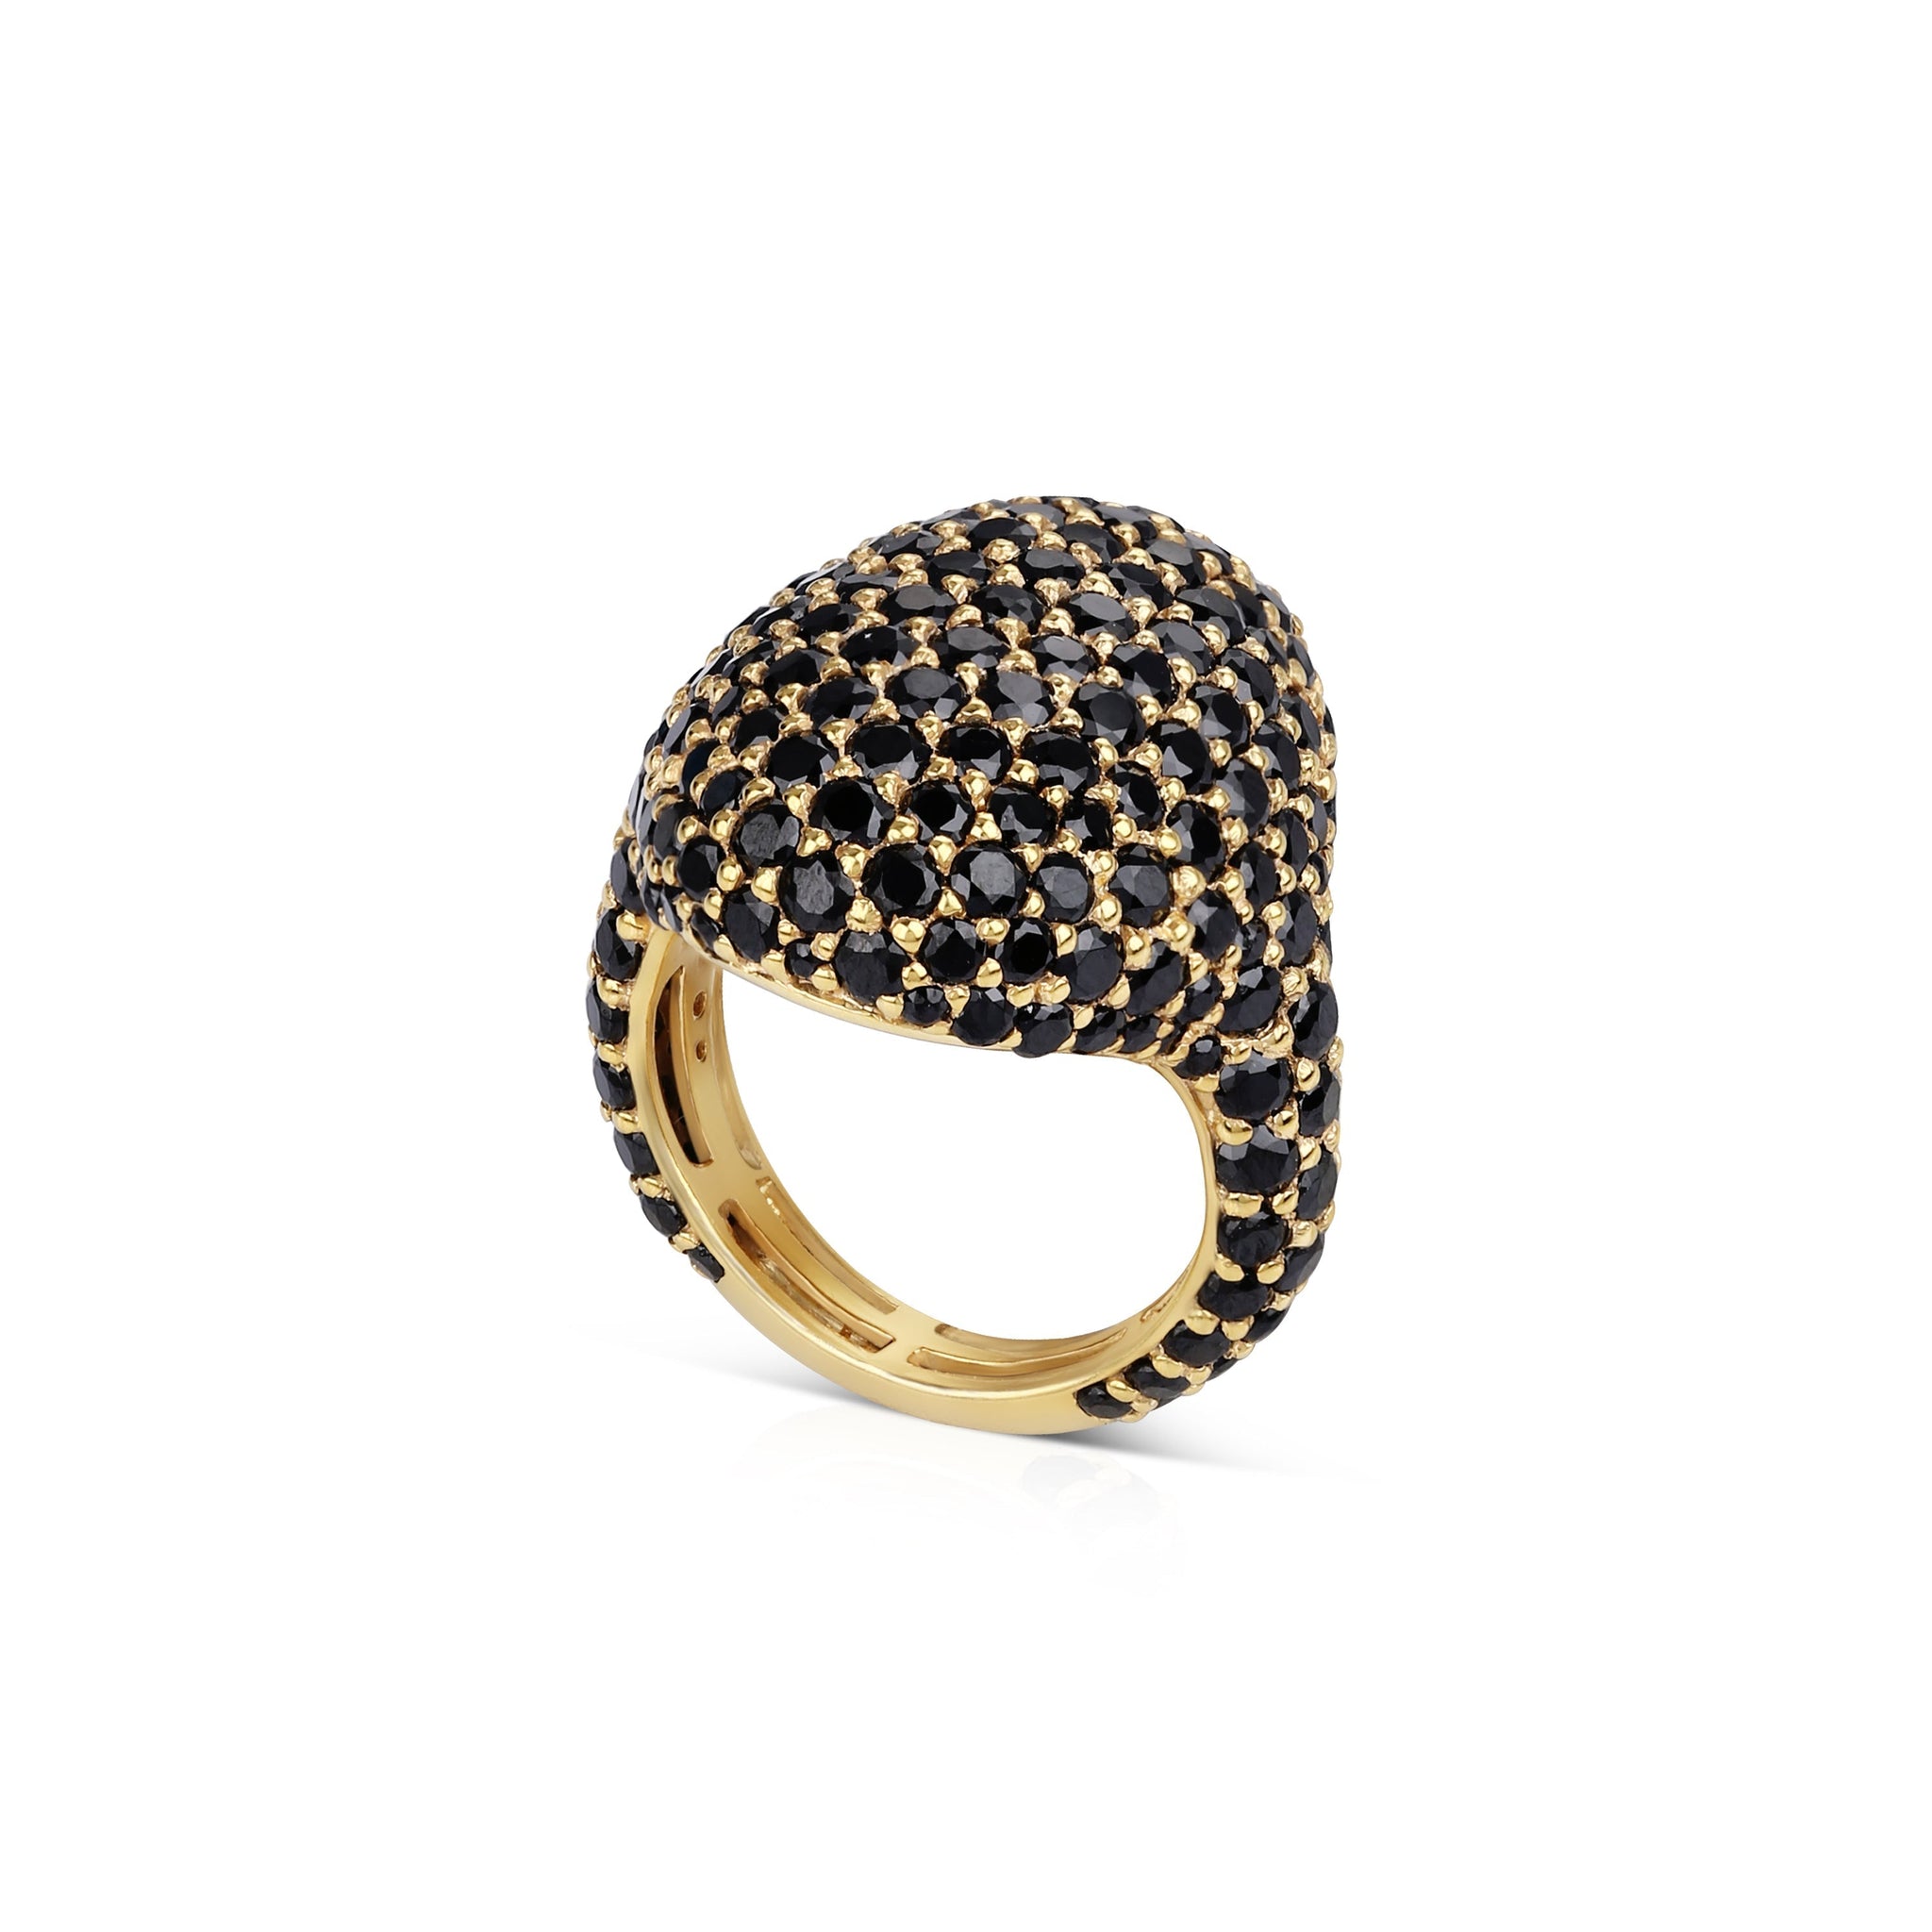 The Statement Ring - Midnight Gold